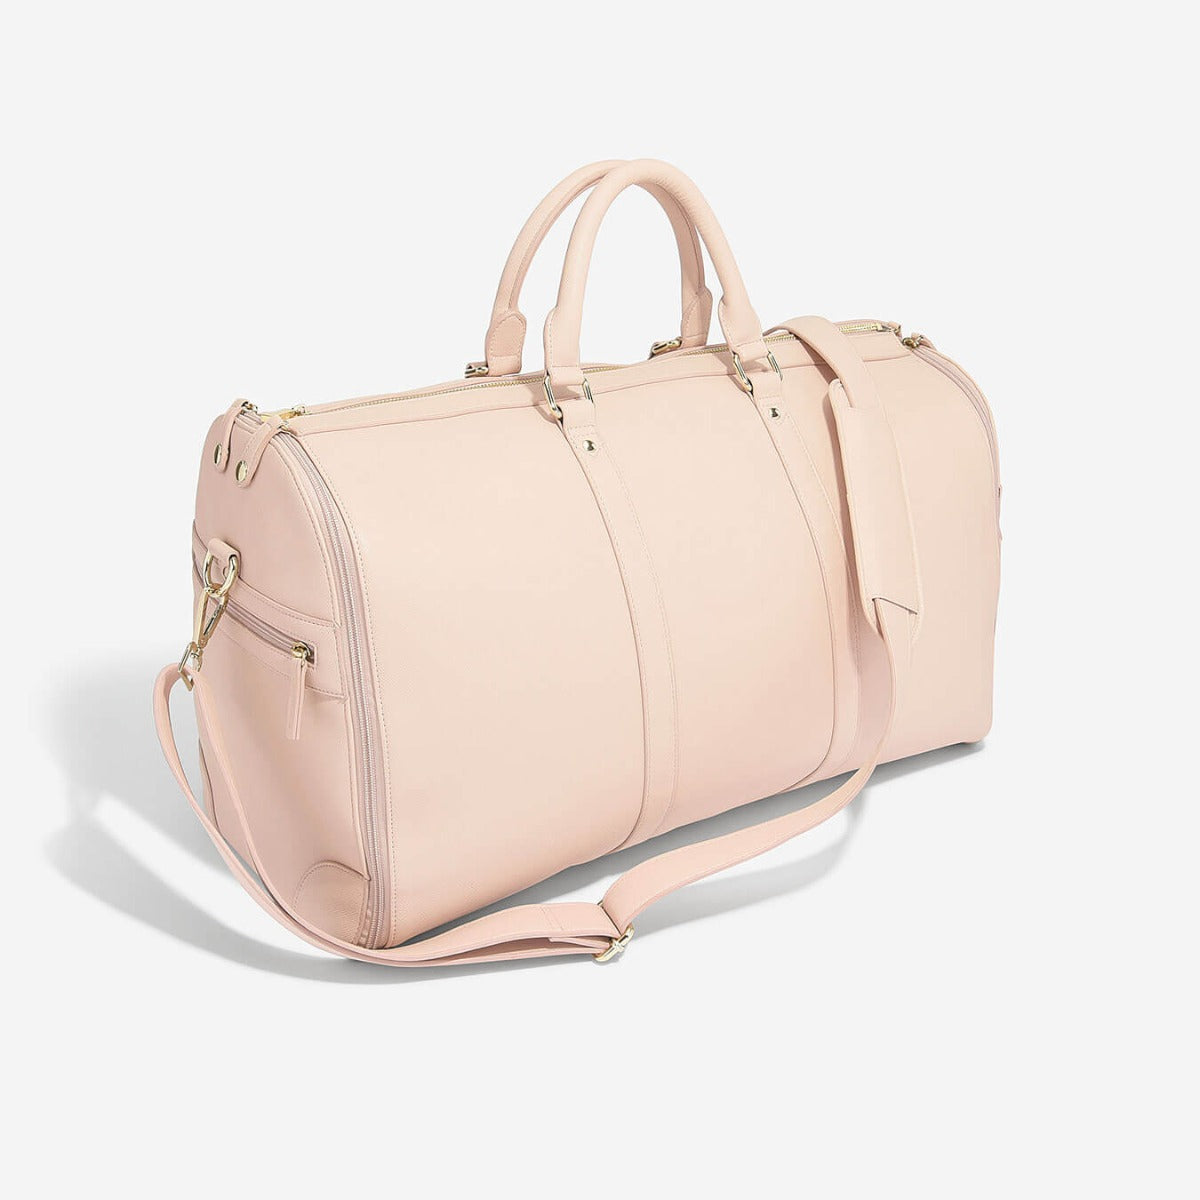 Stackers Weekend Garment Bag - Blush - Holiday Accent Ltd